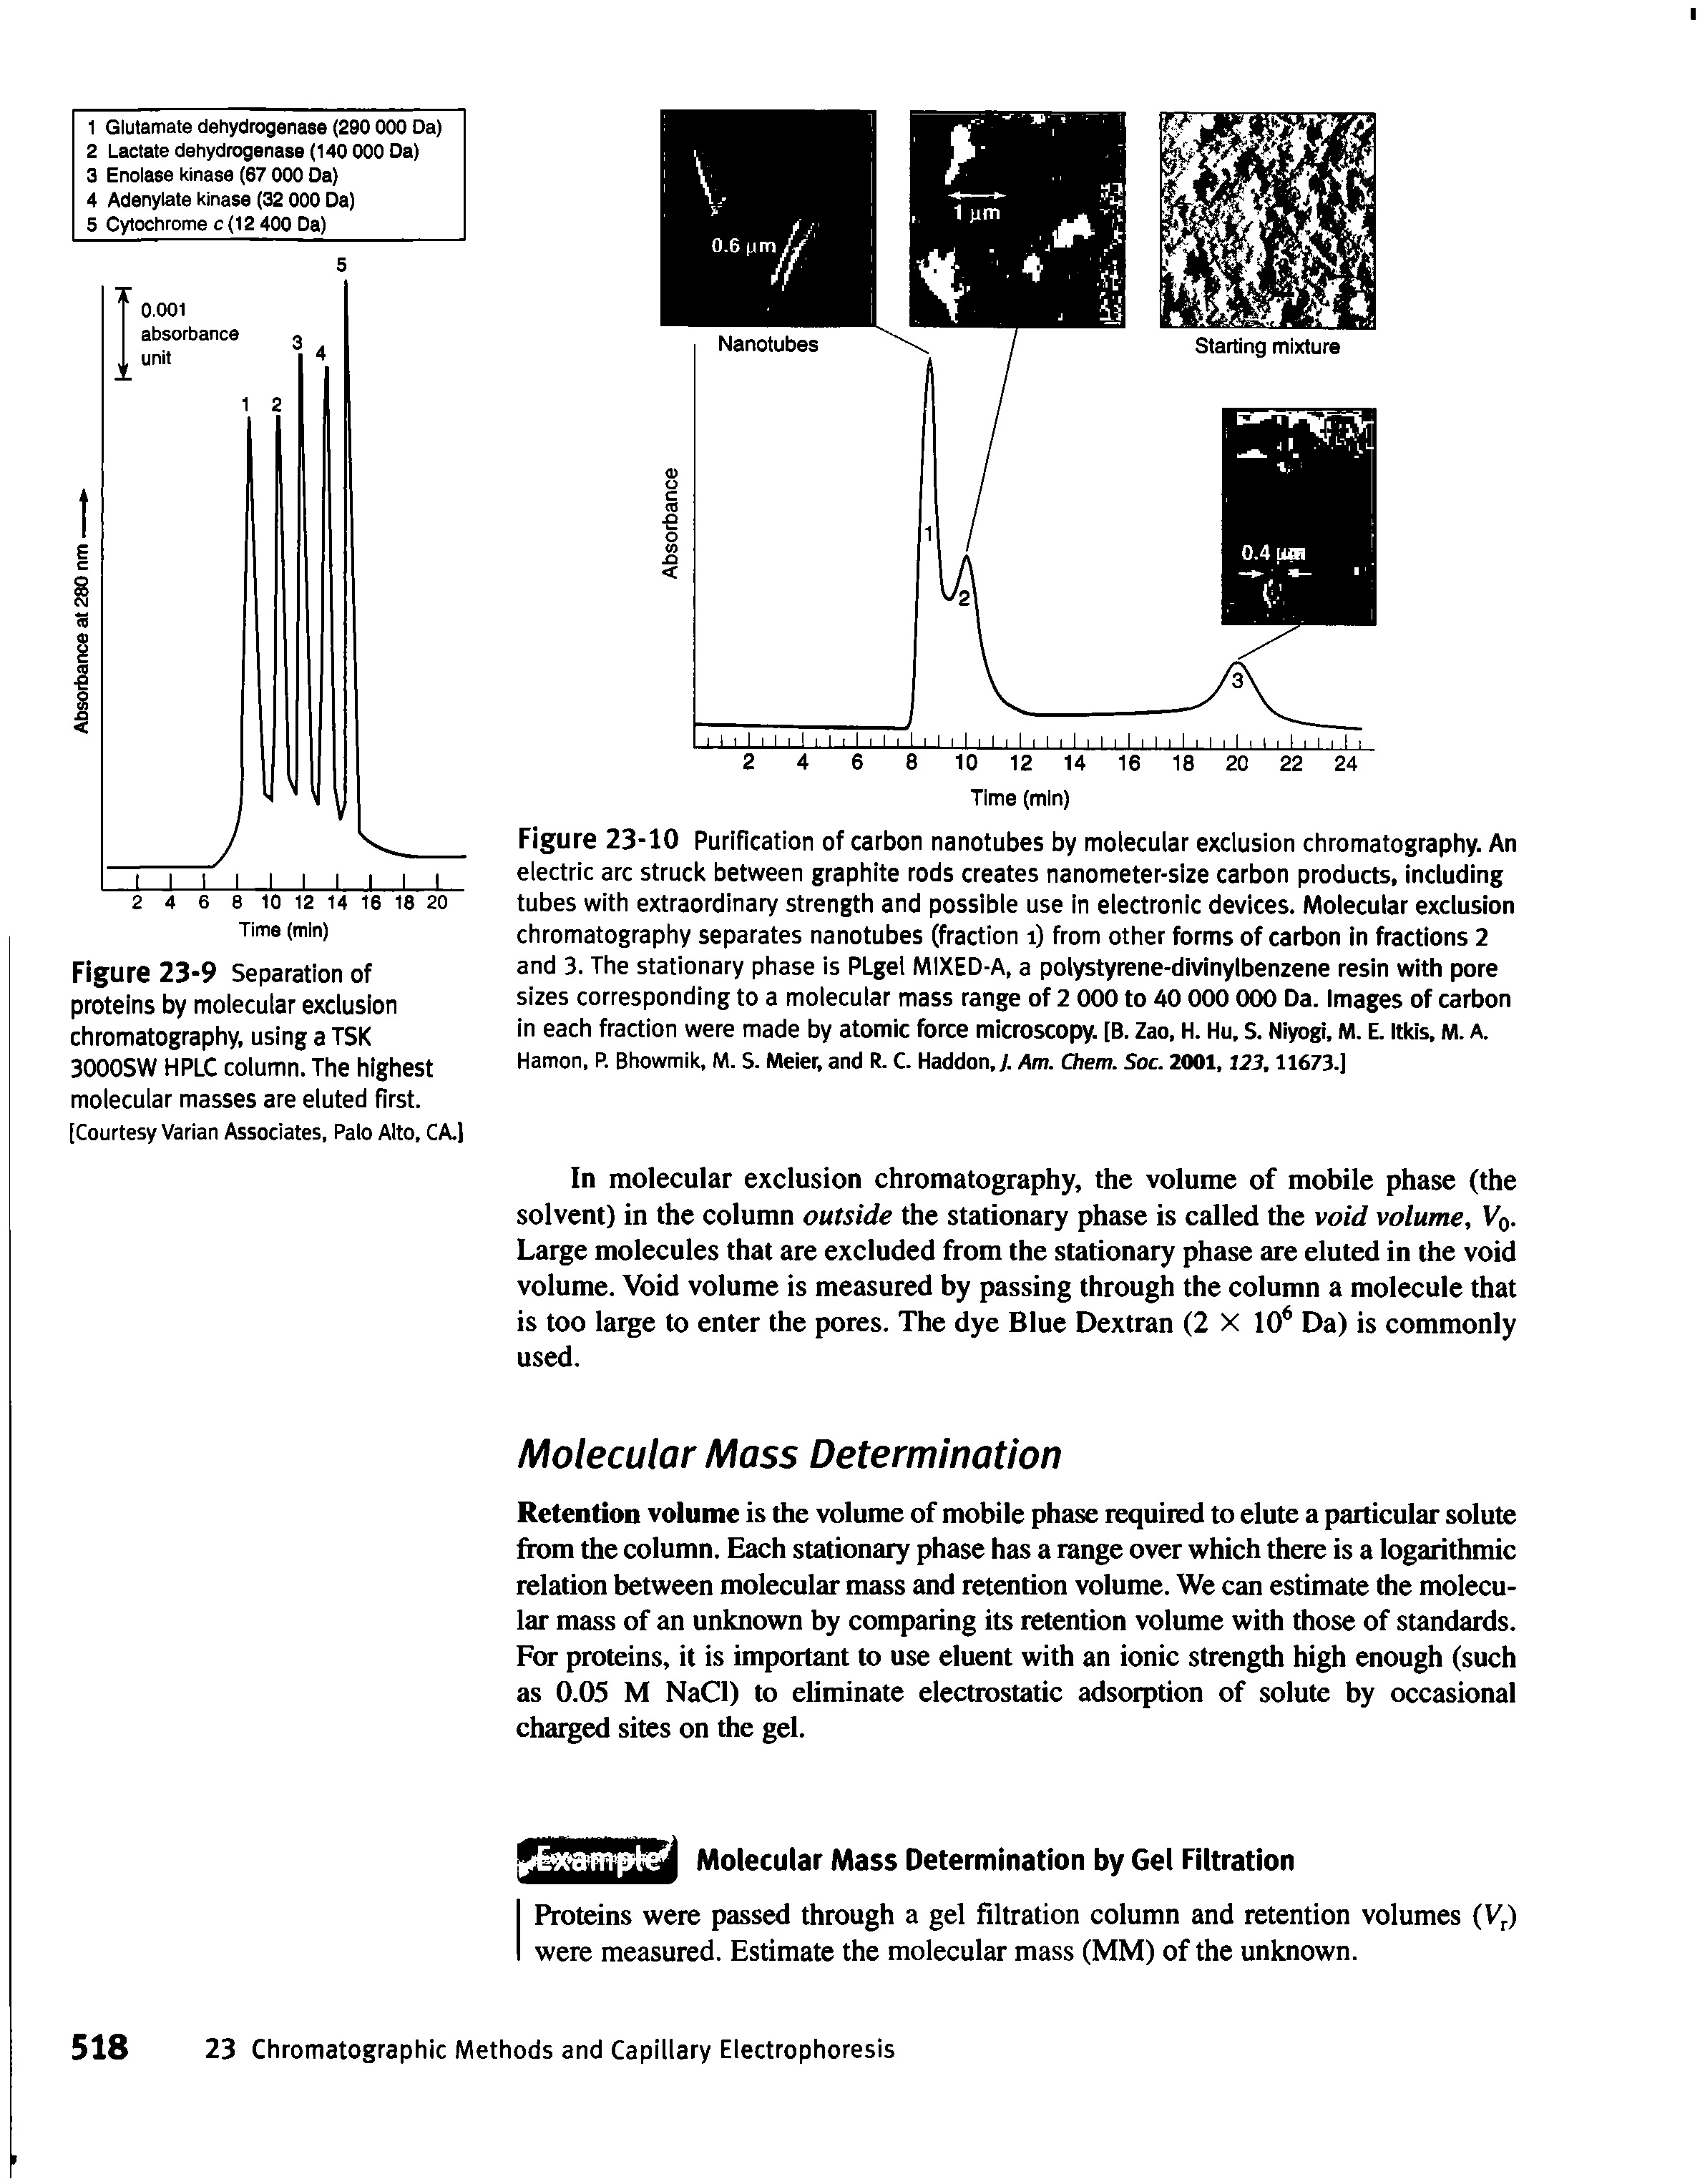 Figure 23-10 Purification of carbon nanotubes by molecular exclusion chromatography. An electric arc struck between graphite rods creates nanometer-size carbon products, including tubes with extraordinary strength and possible use in electronic devices. Molecular exclusion chromatography separates nanotubes (fraction i) from other forms of carbon in fractions 2 and 3. The stationary phase is PLgel MIXED-A, a polystyrene-divinylbenzene resin with pore sizes corresponding to a molecular mass range of 2 000 to 40 000 000 Da. Images of carbon in each fraction were made by atomic force microscopy. [B. Zao, H. Hu, S. Niyogi, M. E. Itkis. M. A. Hamon, P. Bhowmik, M. S. Meier, and R. C. Haddon, . Am. Chem. Soc. 2001, i23,11673.]...